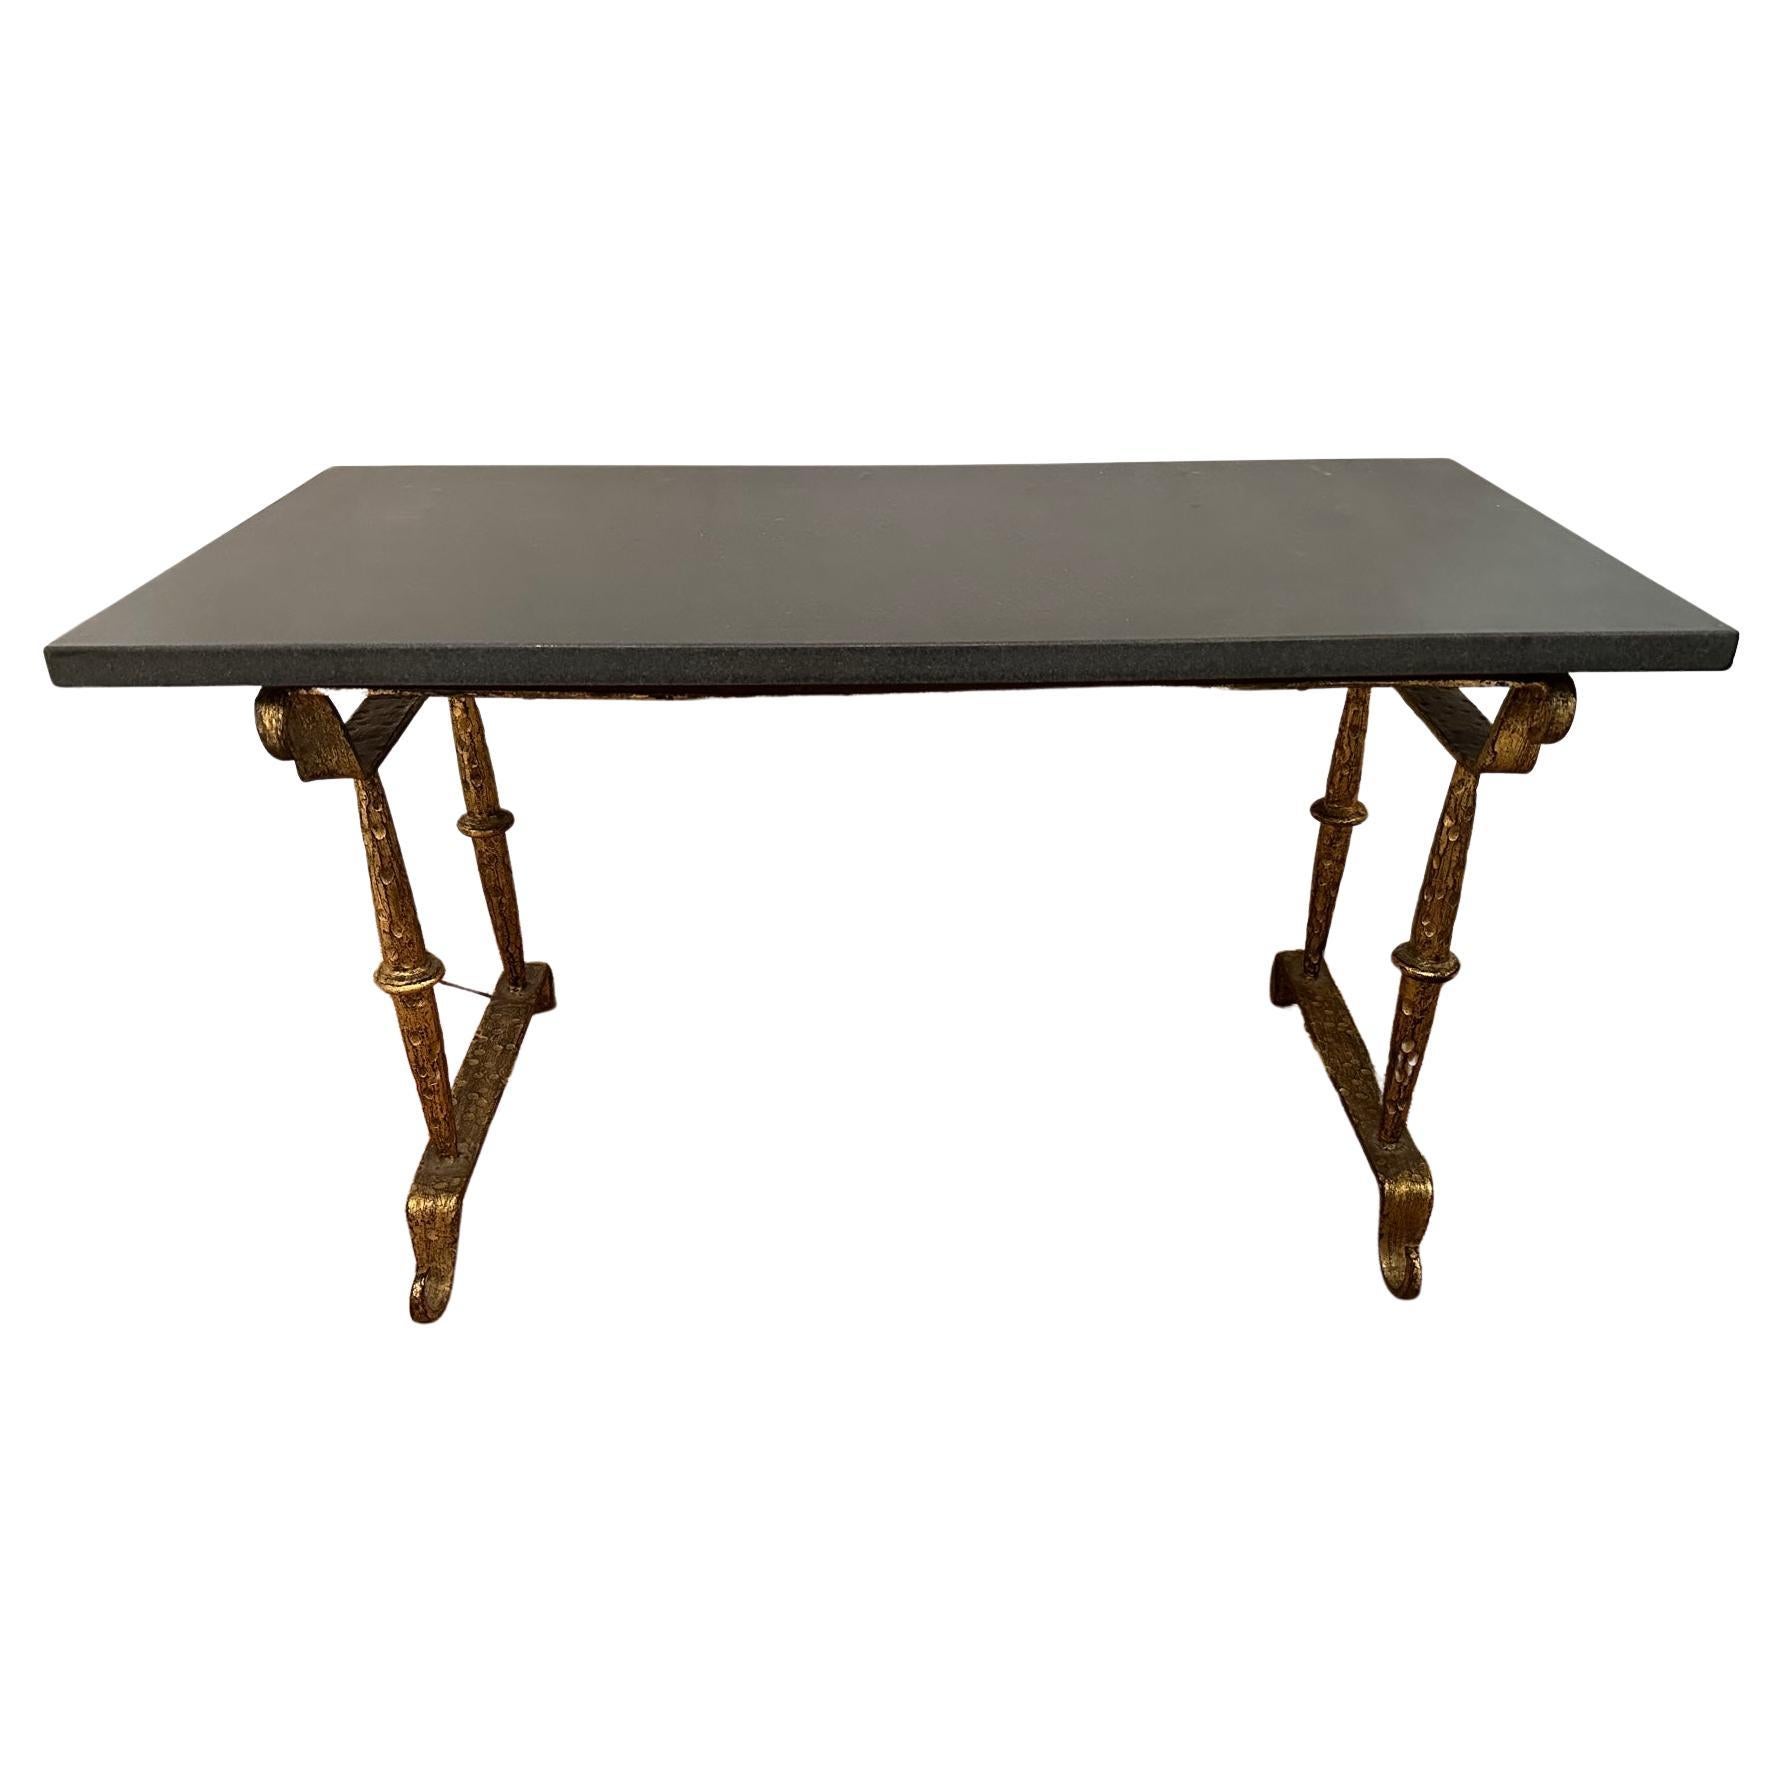 Stylish Giltiron Small Cocktail Table with Black Marble Top